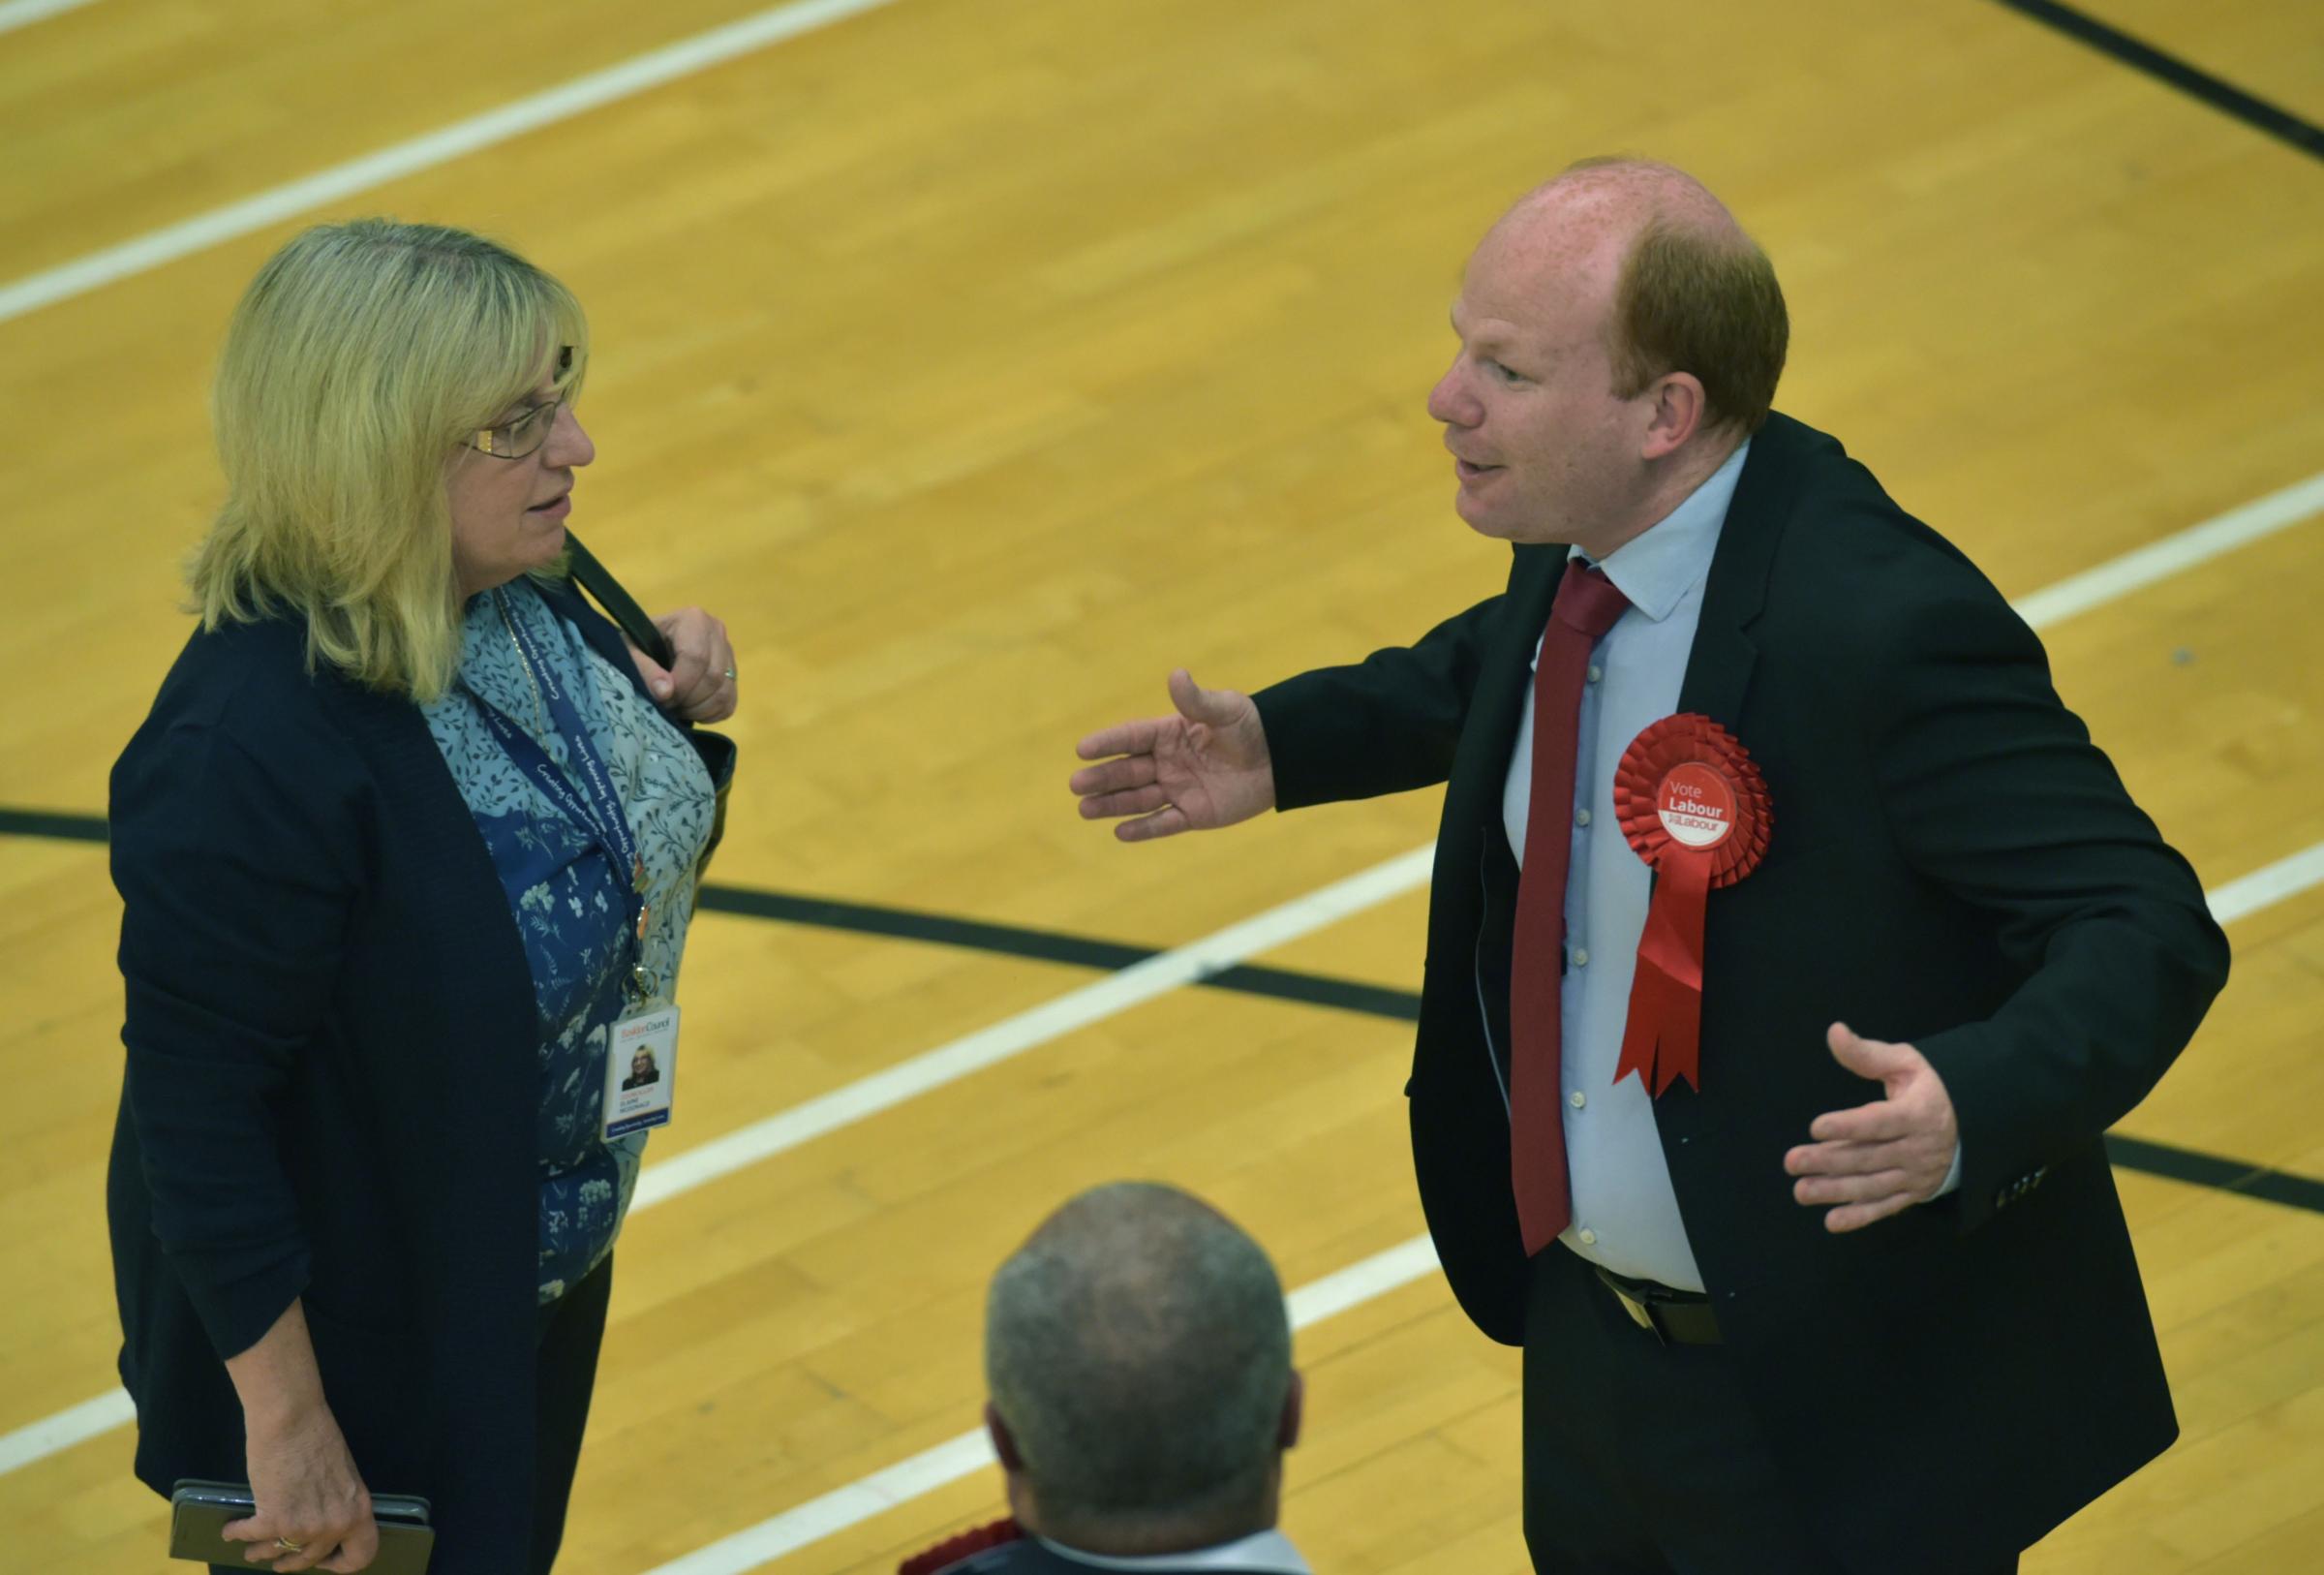 Leader of the Labour group in Basildon, Jack Ferguson (right) reacts after losing his seat. Pic: PA